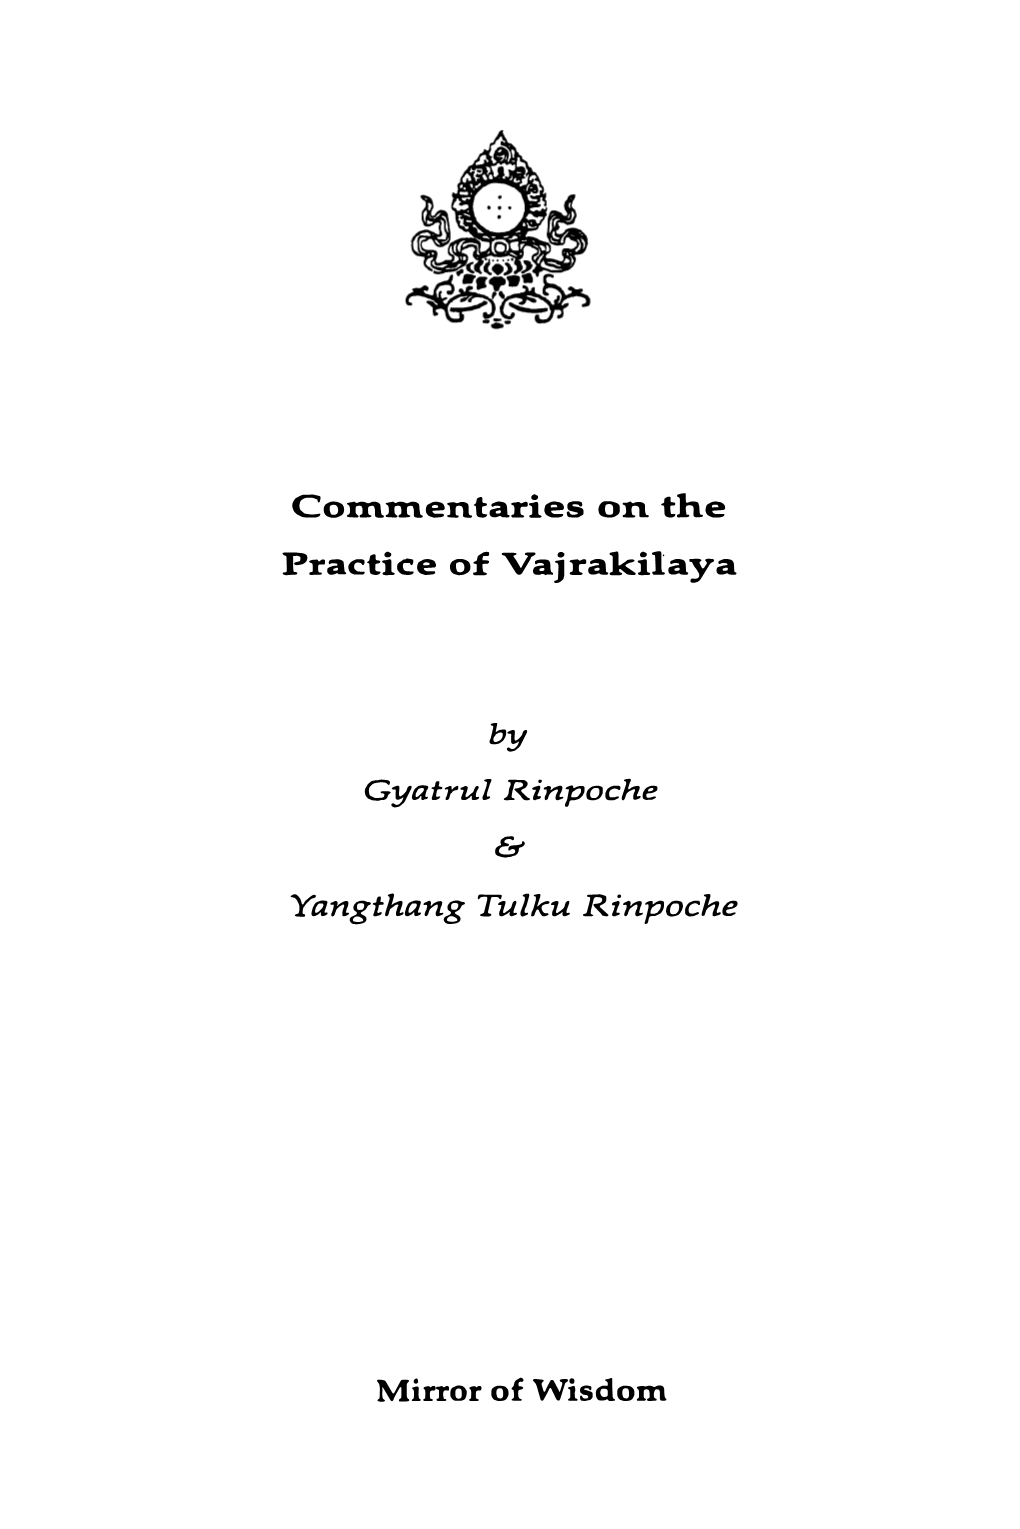 Commentaries on the Practice of Vajrakilaya